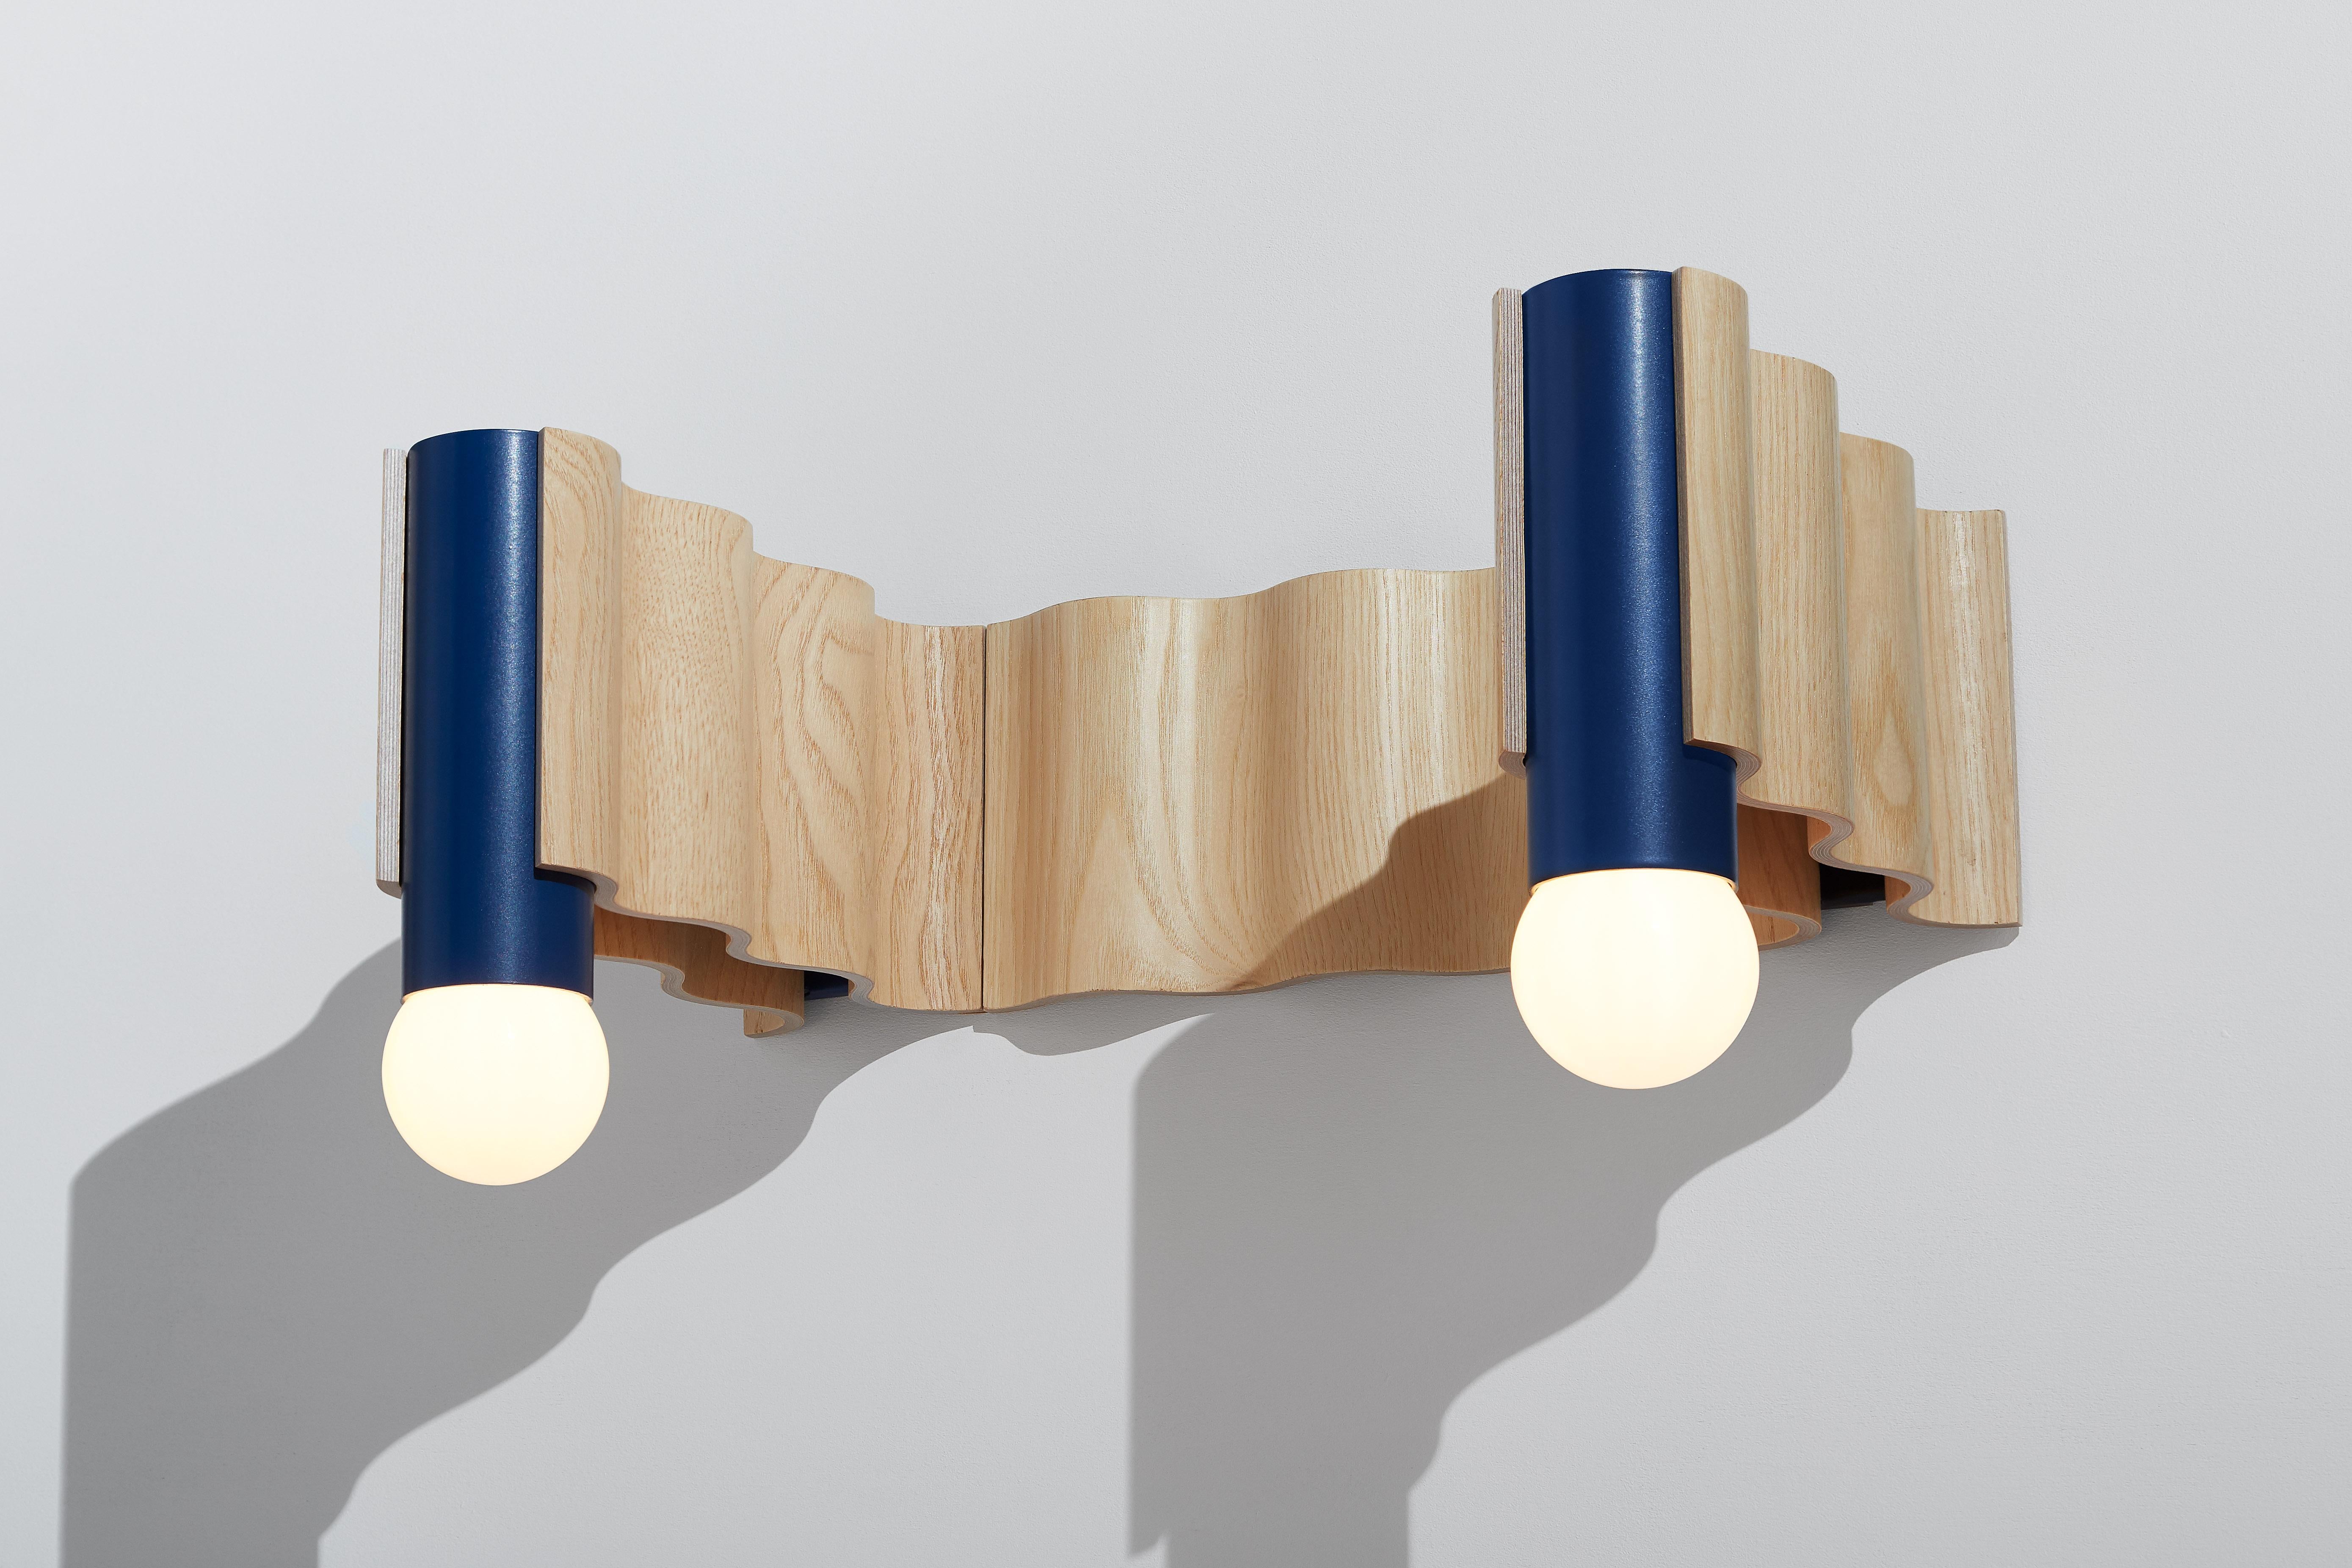 Double sconce made from ash veneered plywood (clear coated) and sapphire blue powder-coated aluminium tube.

Technical information:
- Comes with dimmable bulb (Class A60, 8W, 720 Lumen, 3000° Kelvin, A+ energy rating, Ra > 80)
- Can be wired for a